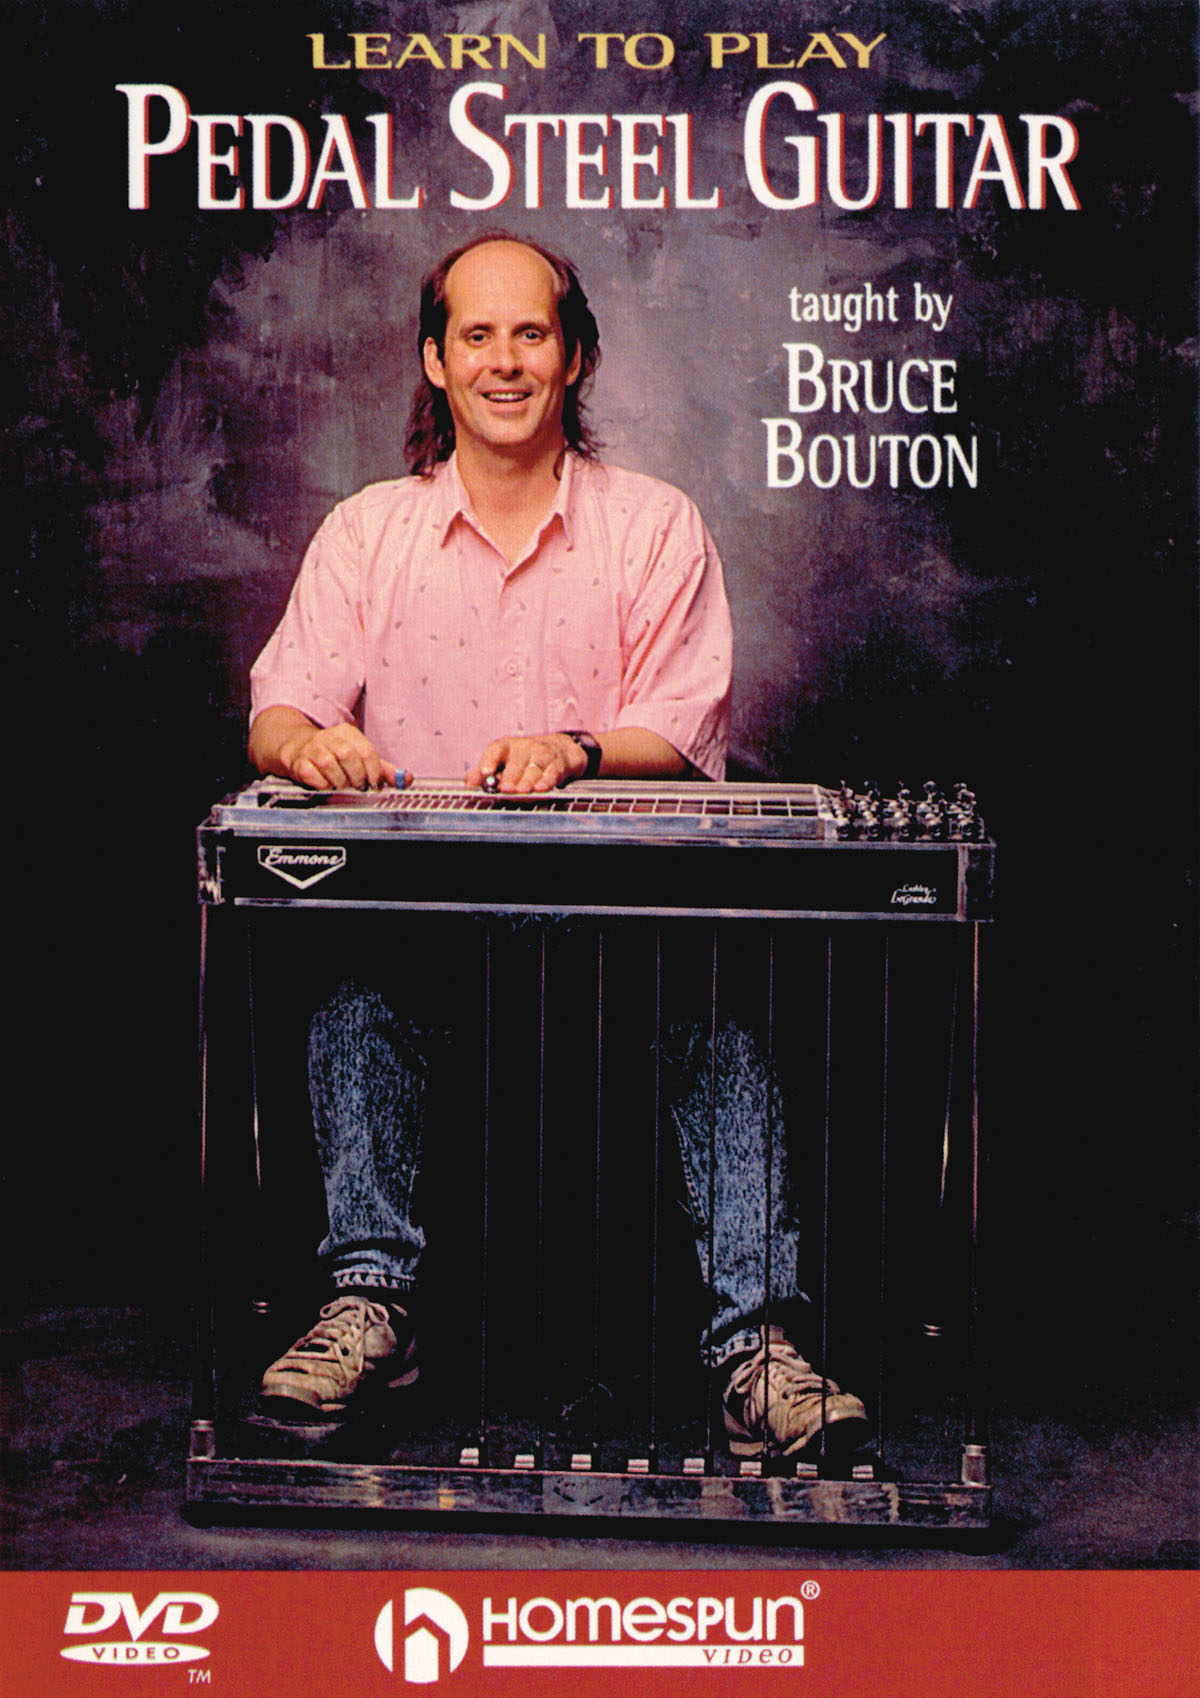 Learn to Play Pedal Steel Guitar